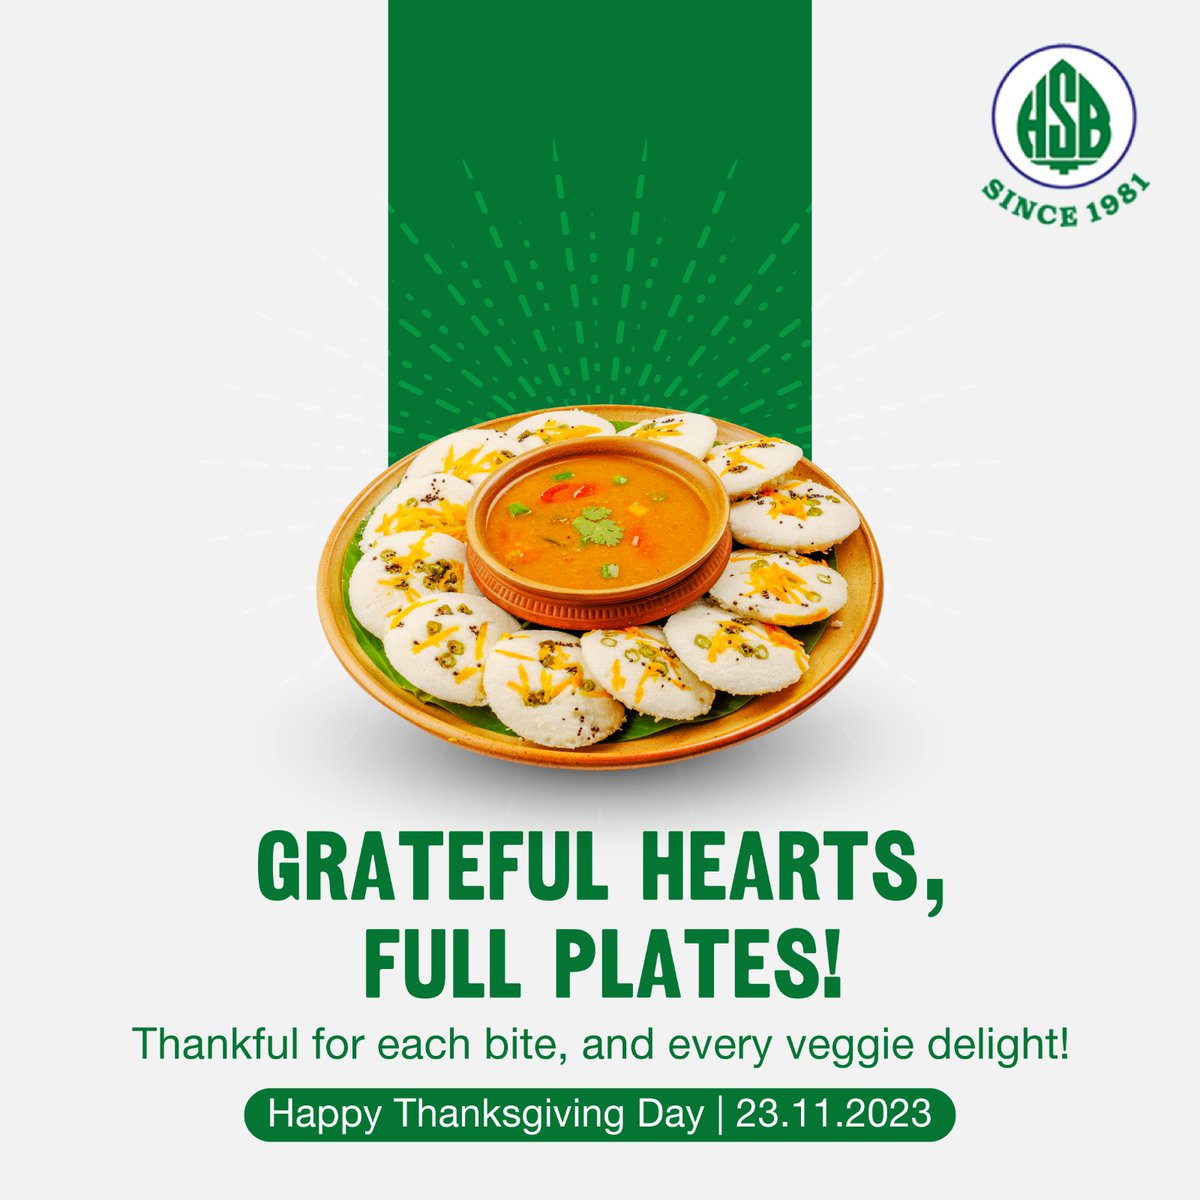 This Thanksgiving, we're serving up gratitude with a side of appreciation. Happy Thanksgiving Day!

Visit our website for more information: saravanabhavan.co

#hotelsaravanabhavan #HSB #QualityFoodProducts #loveatfirstbite #deliciousmeals #tastyhealthy #sweetandsnacks